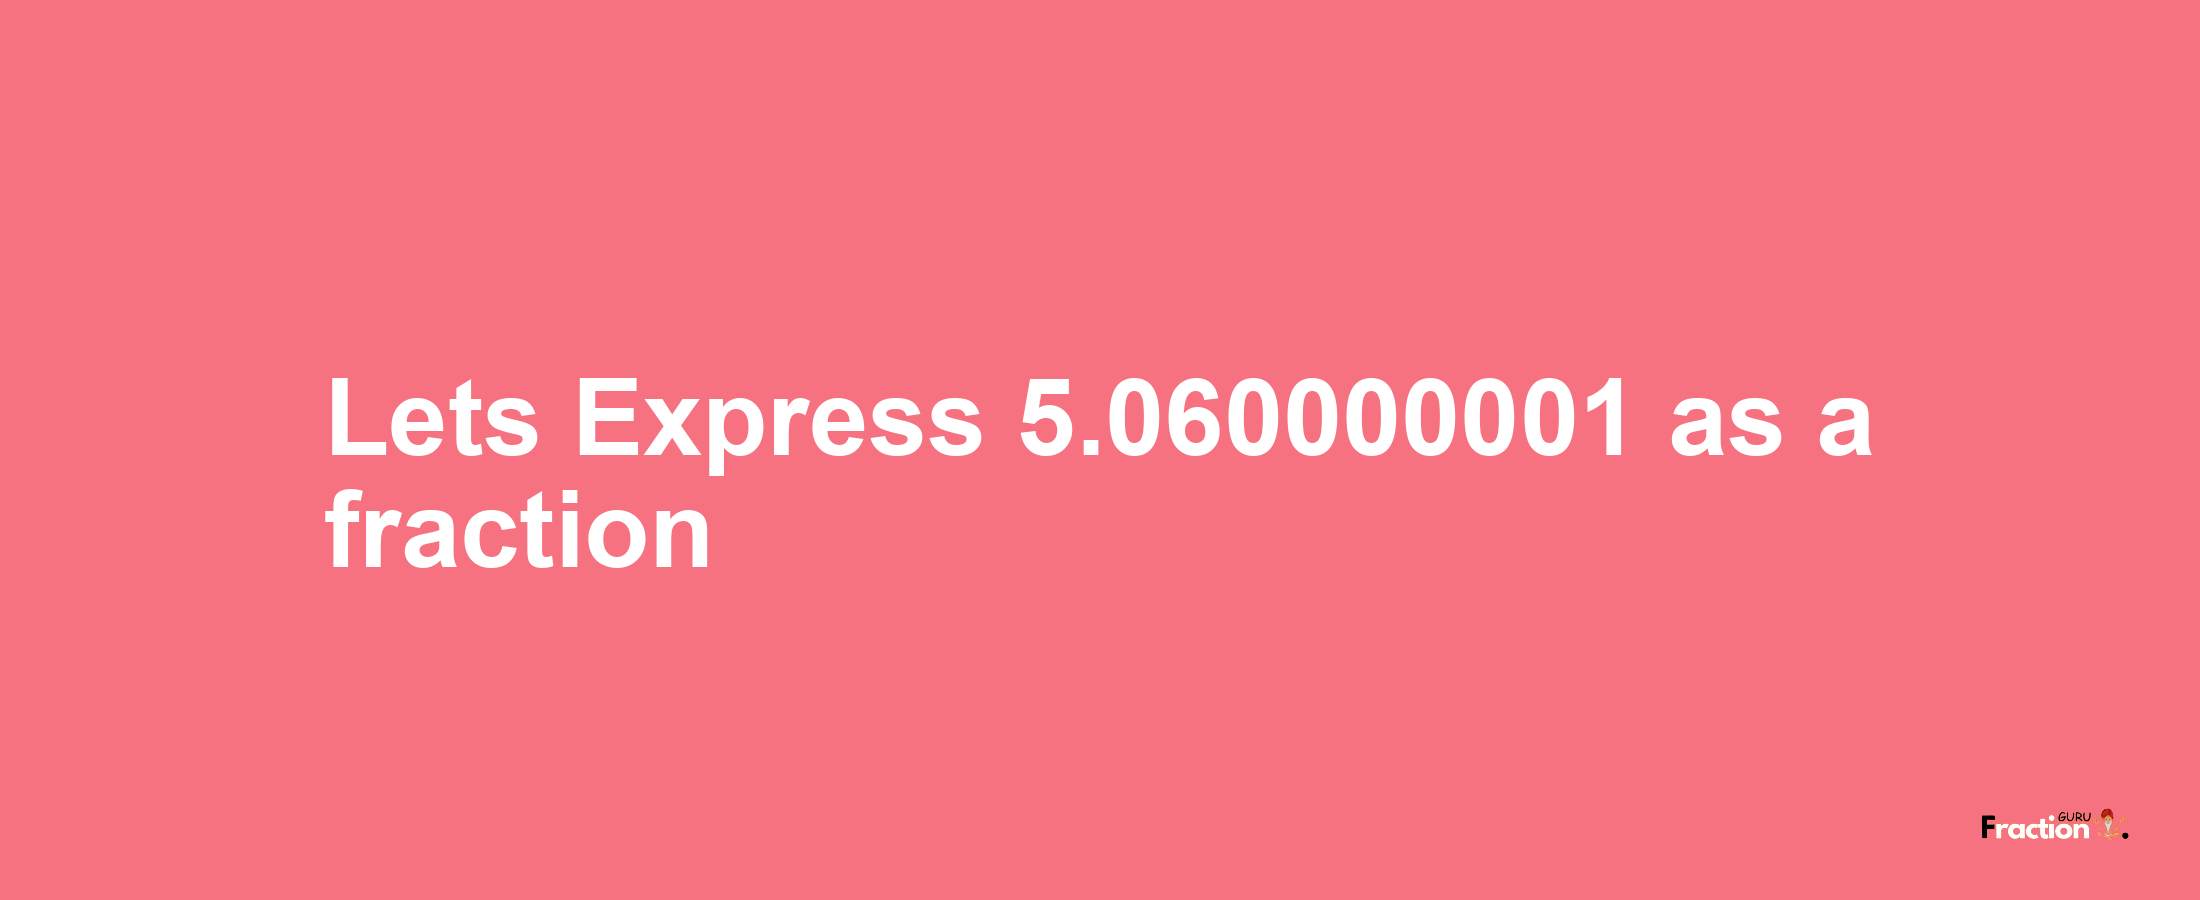 Lets Express 5.060000001 as afraction